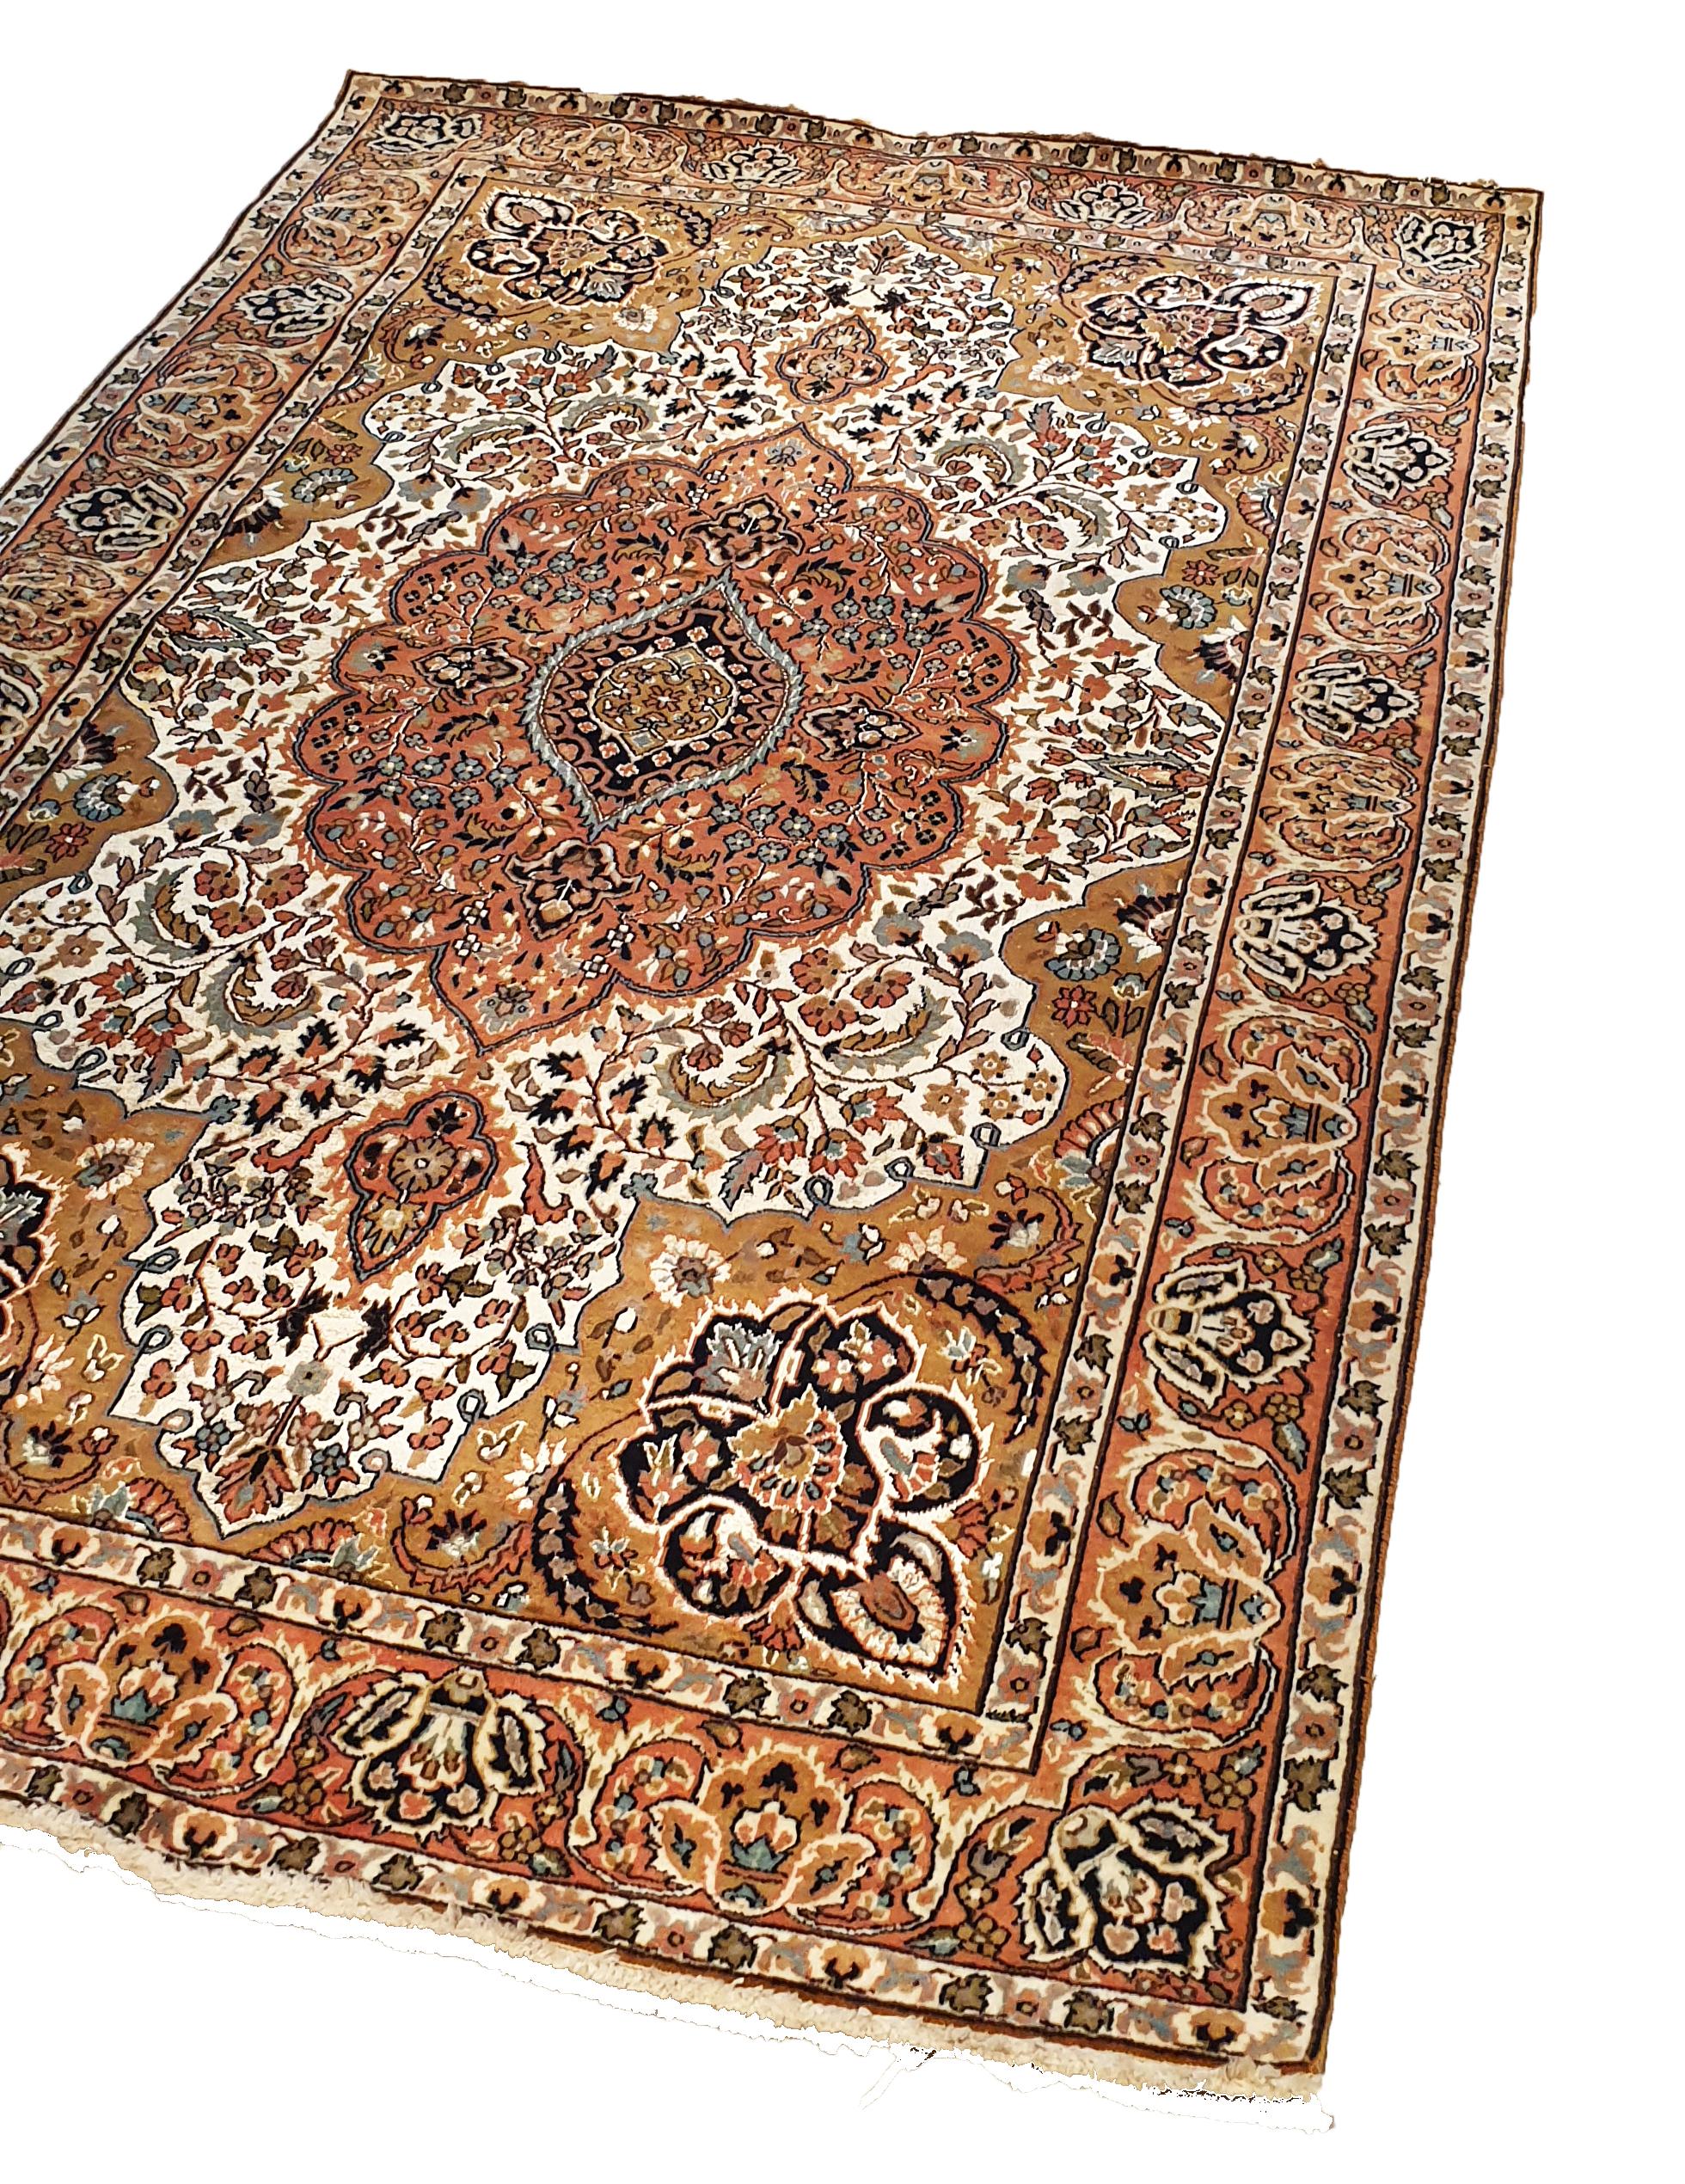 N° 736, hand knotted carpet in India factory from 20th century.
High quality, beautiful graphics and remarkable finesse.
Perfect state of preservation.

Measures: 185 x 115 cm.